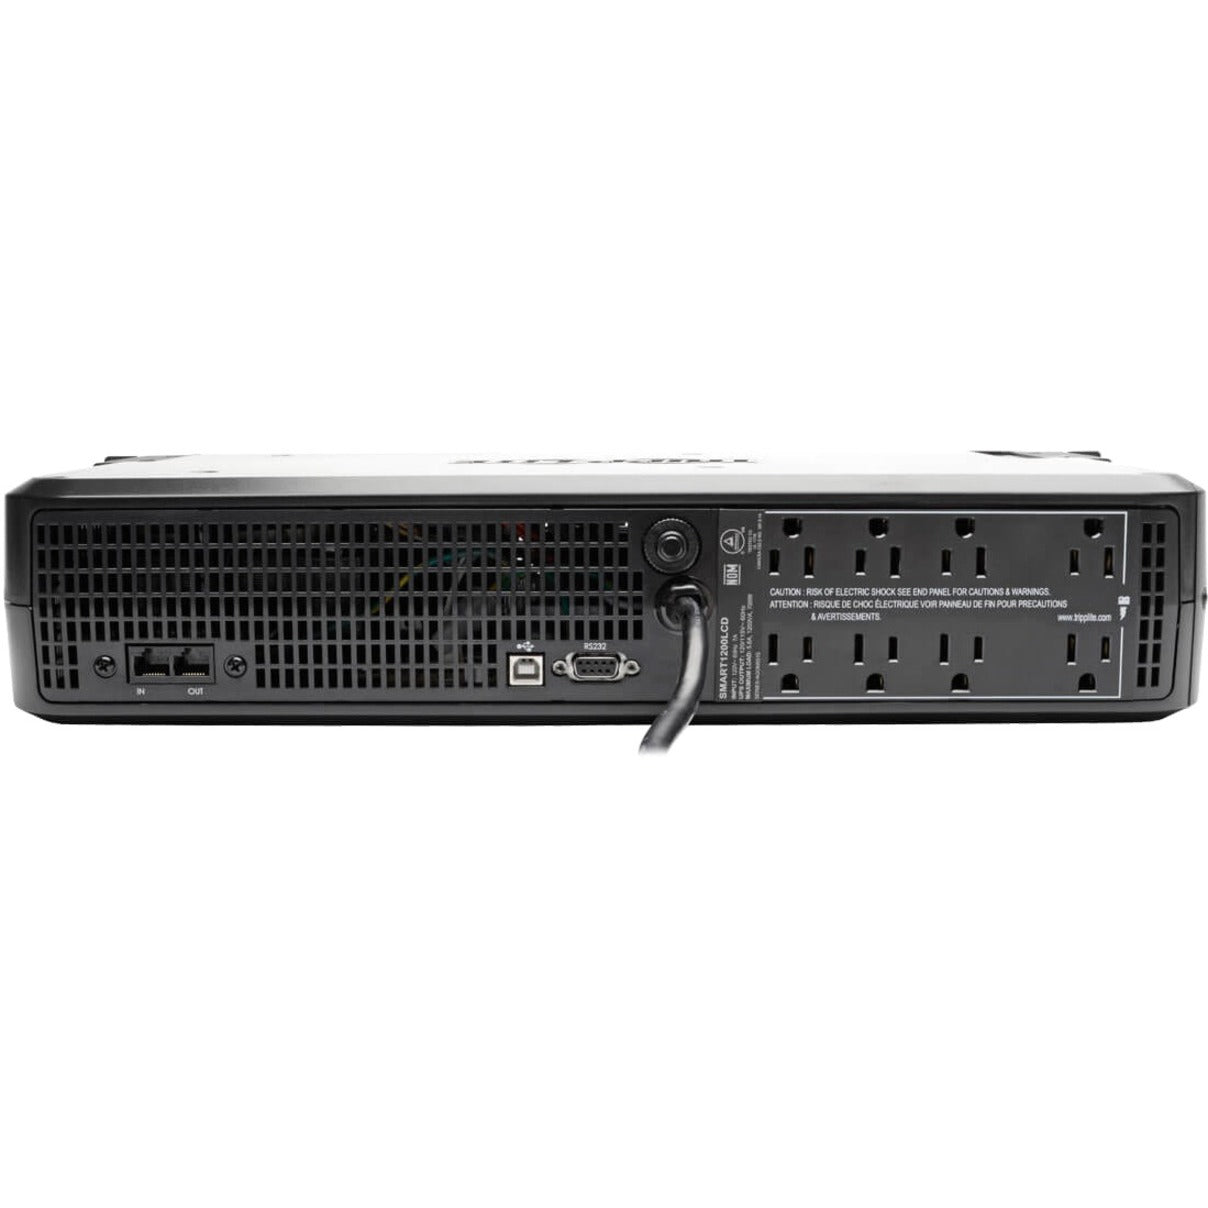 Tripp Lite SMART1500LCD SmartPro 1500 VA Rackmount/Tower Digital UPS, Backup Power for Home and Office [Discontinued]